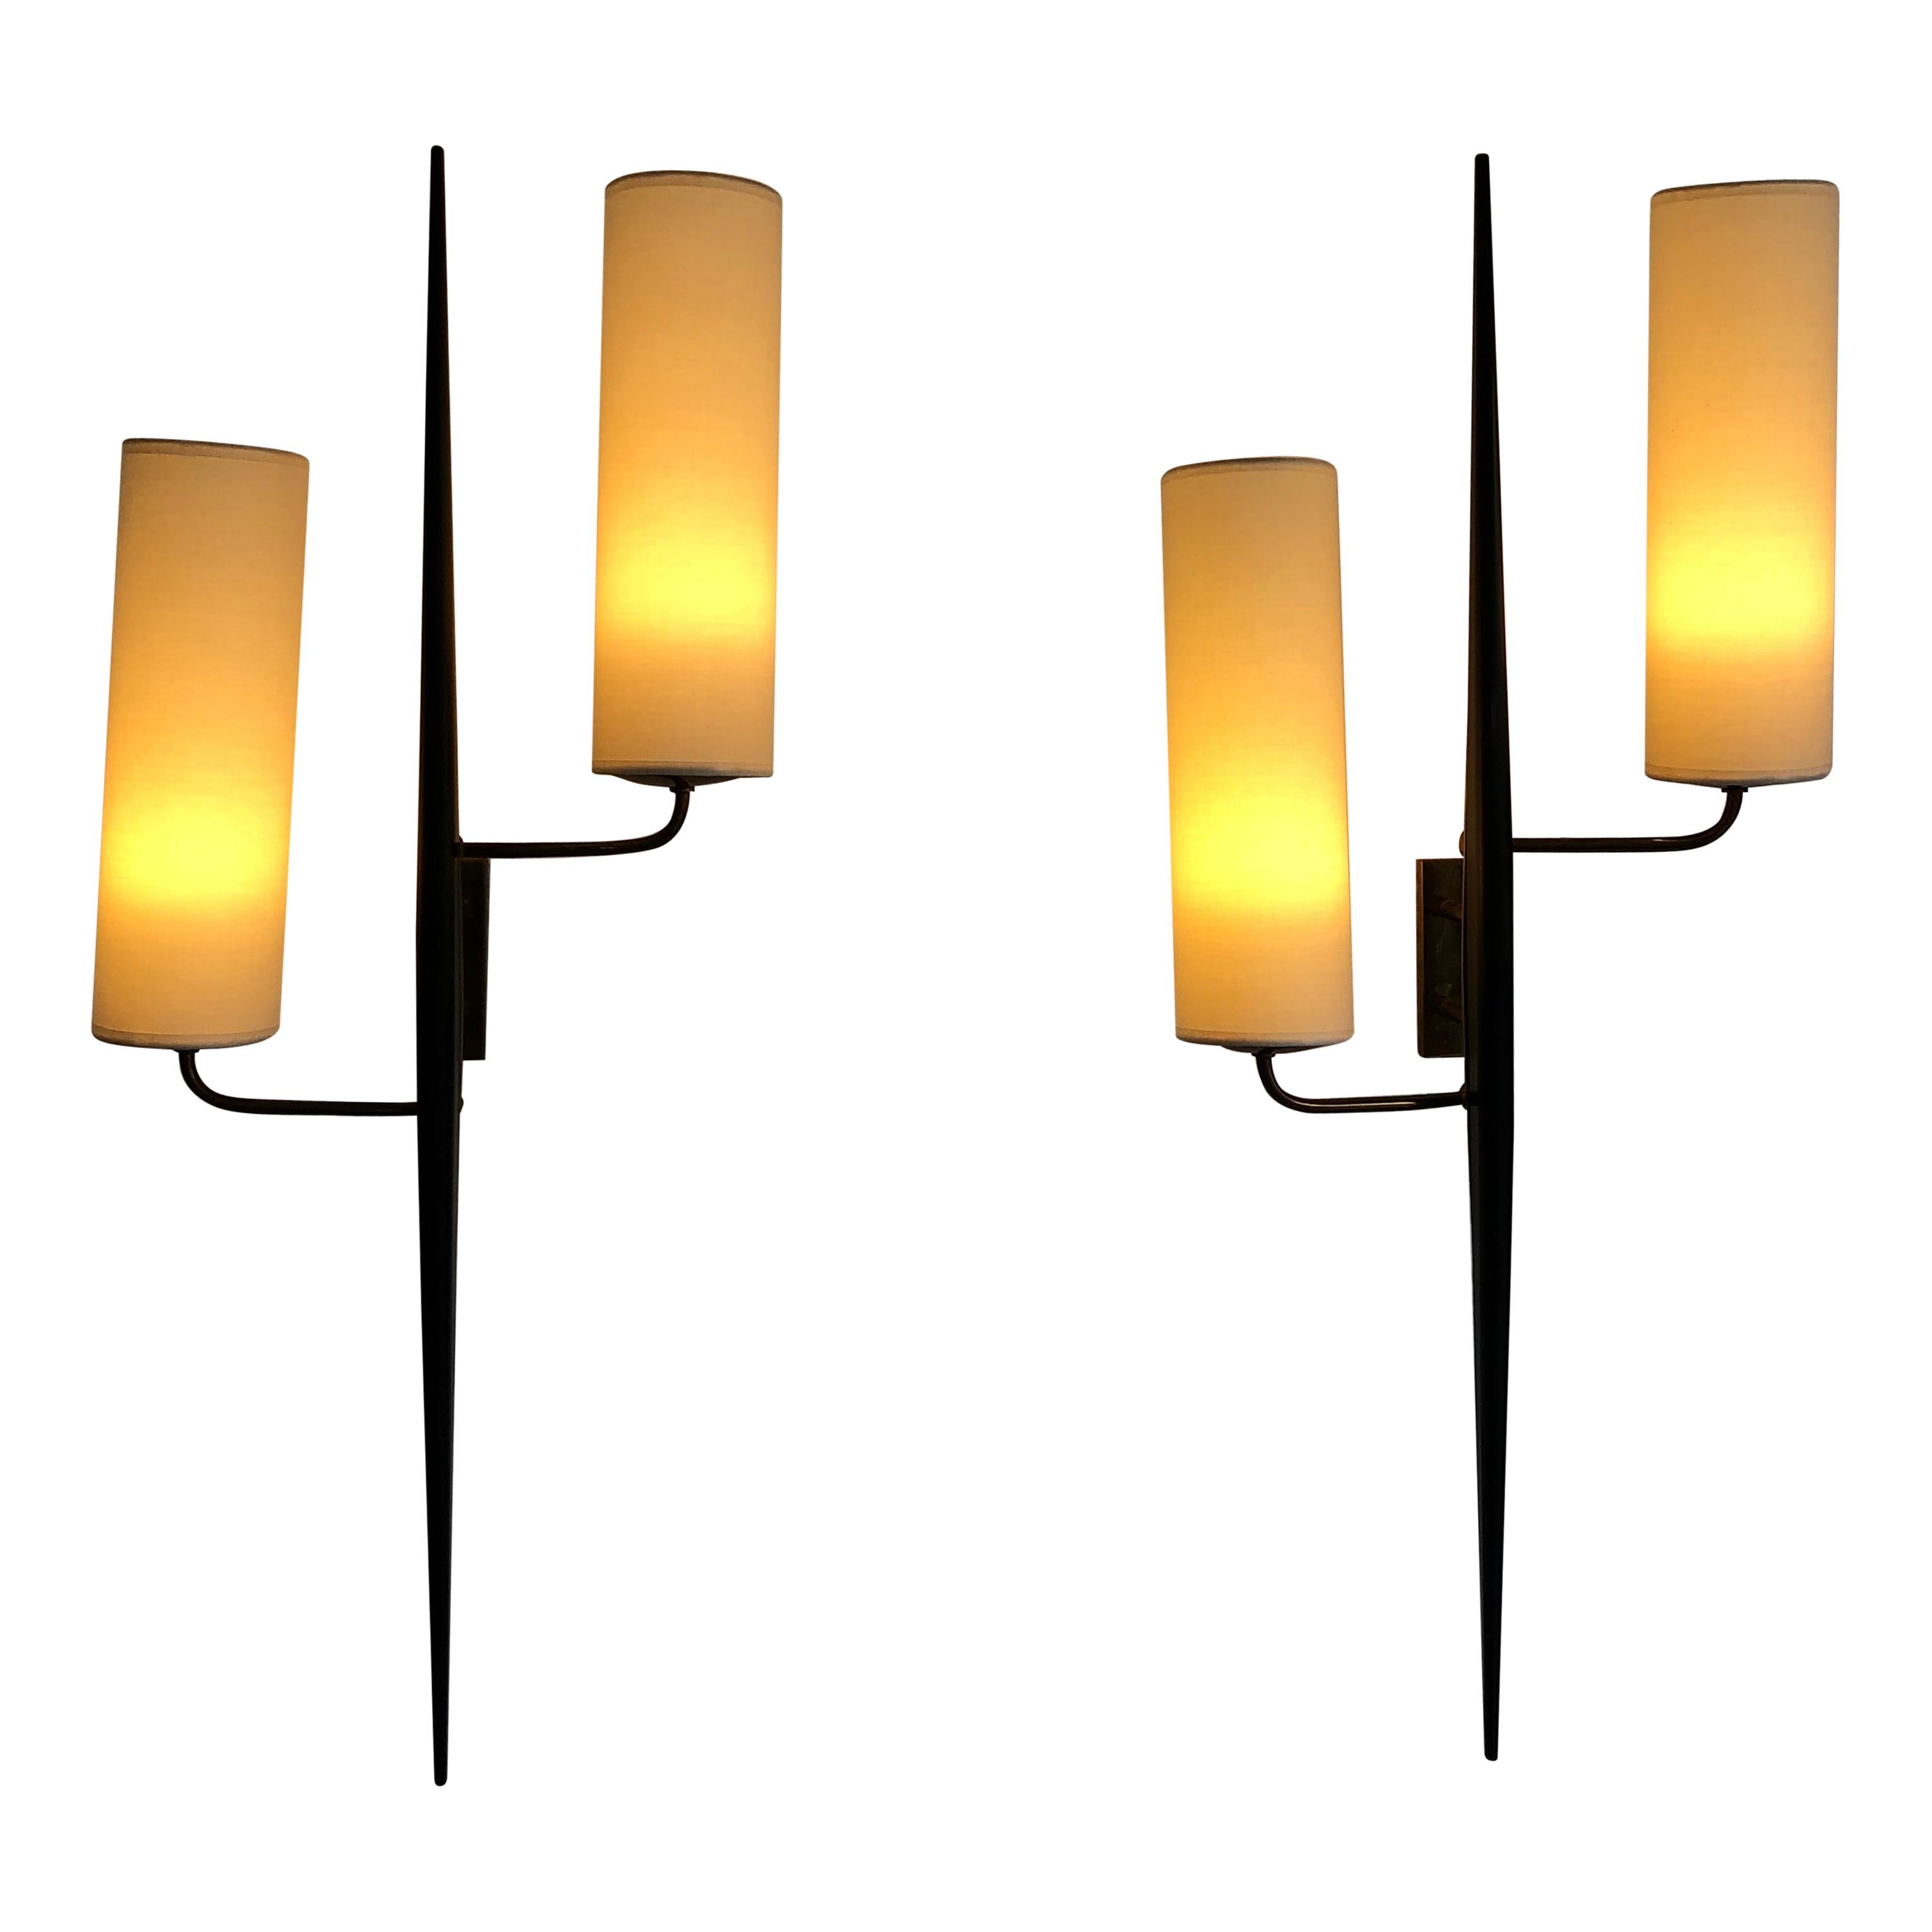 Pair of sconces by Maison Lunel
from 1950
in black lacquered wood and brass
lampshades.